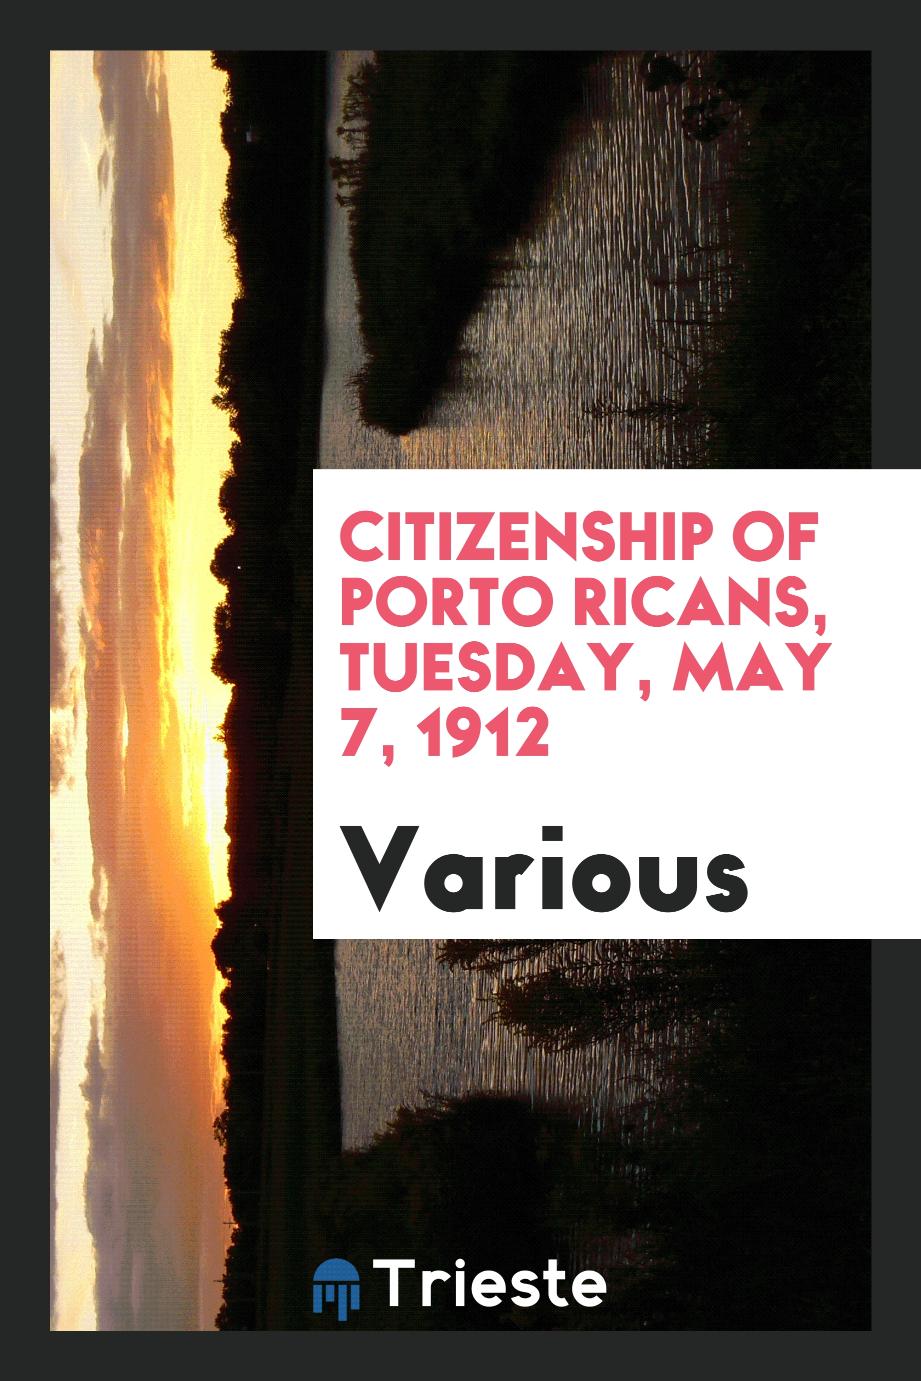 Citizenship of Porto Ricans, Tuesday, May 7, 1912